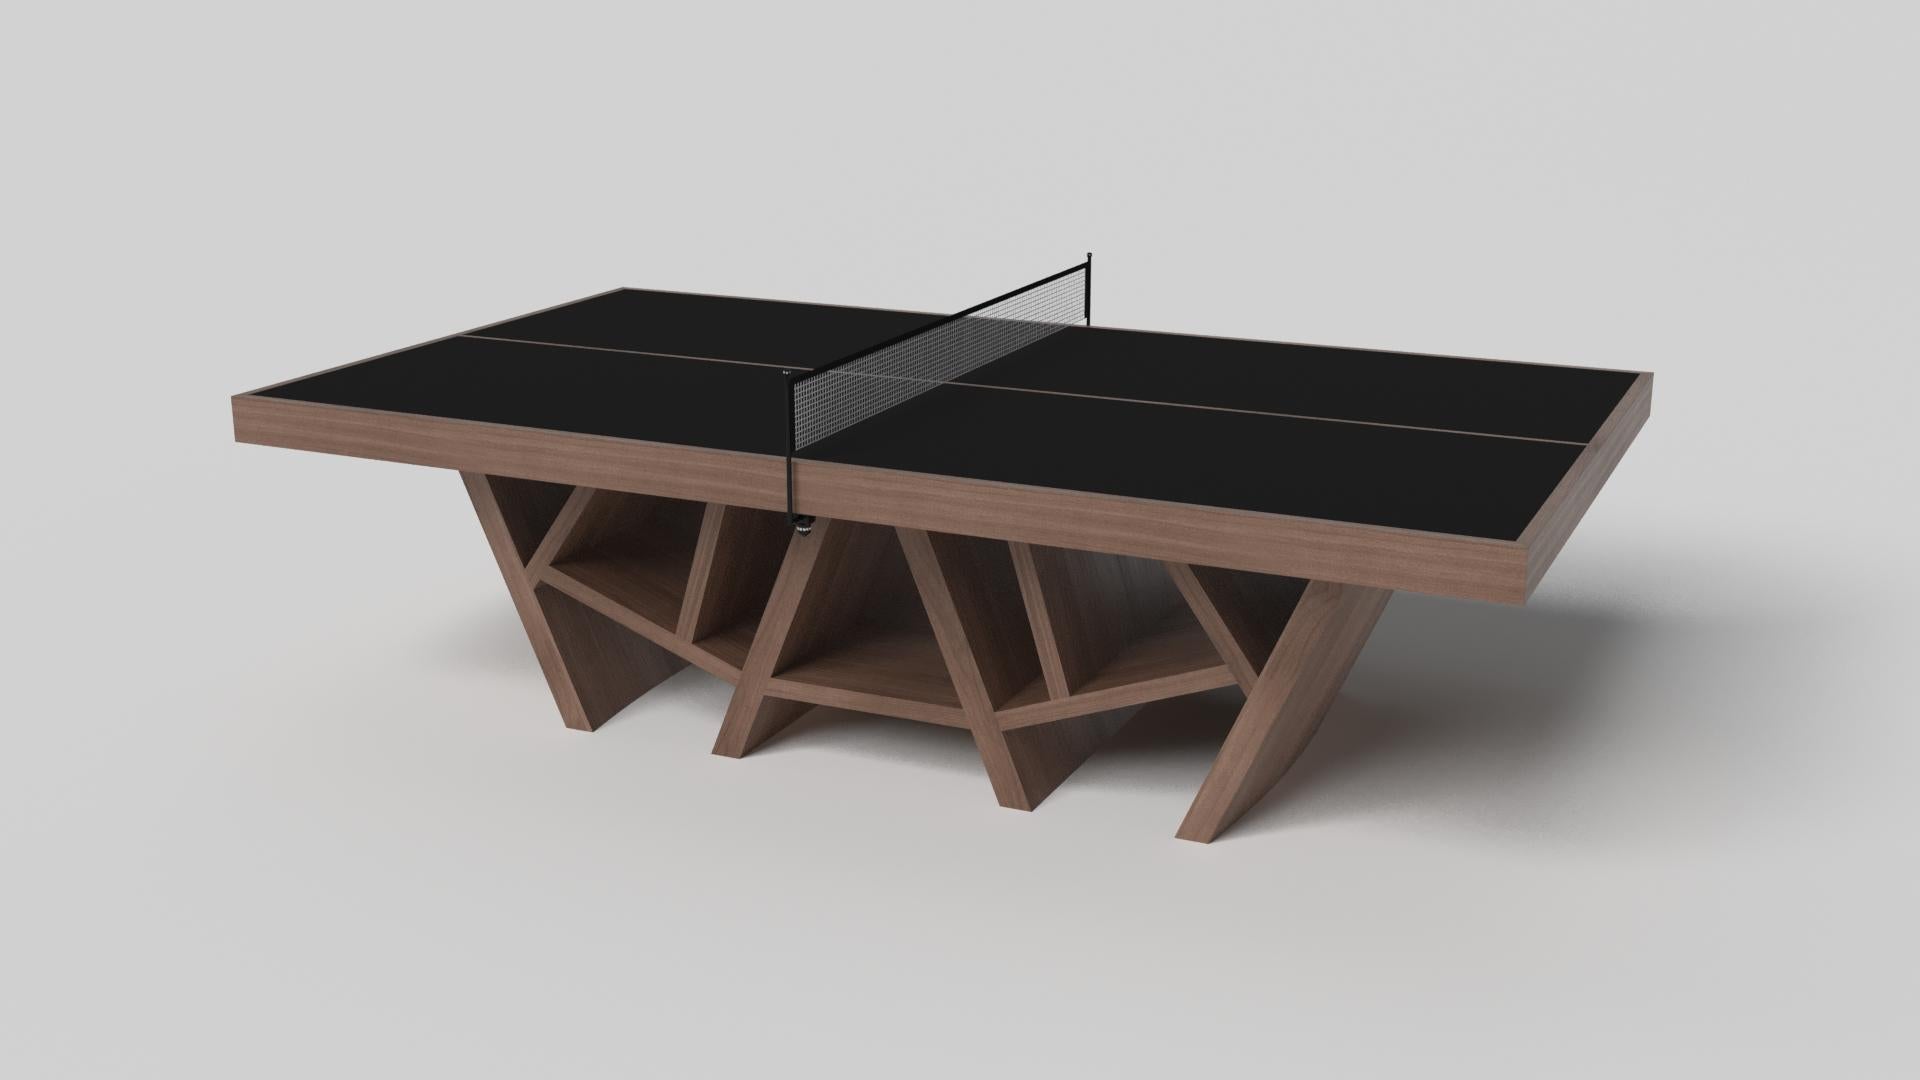 With a combination of acute angles, smooth lines, and geometric configurations, the Maze table tennis table in walnut is characterized by a labyrinth-inspired base with a mystifying motif. Beautifully detailed with a smooth black top for game play,